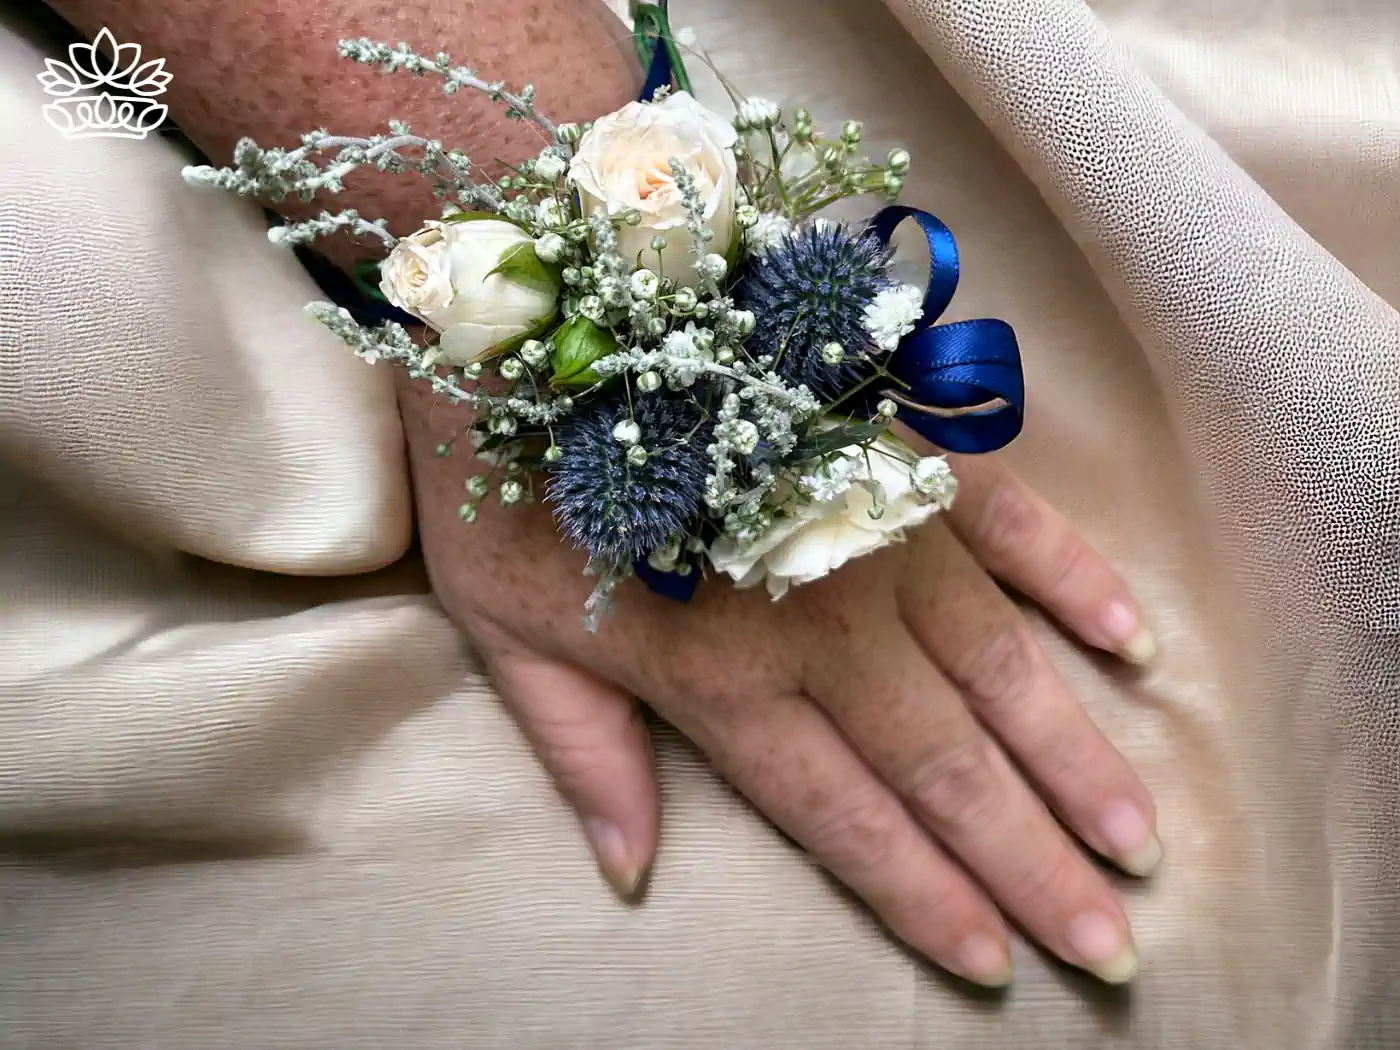 A delicate hand showcases a sophisticated floral corsage featuring ivory roses, striking blue thistle, and soft baby's breath, tied with a deep blue ribbon against a silky beige background. Fabulous Flowers and Gifts - Matric Dance. Delivered with Heart.